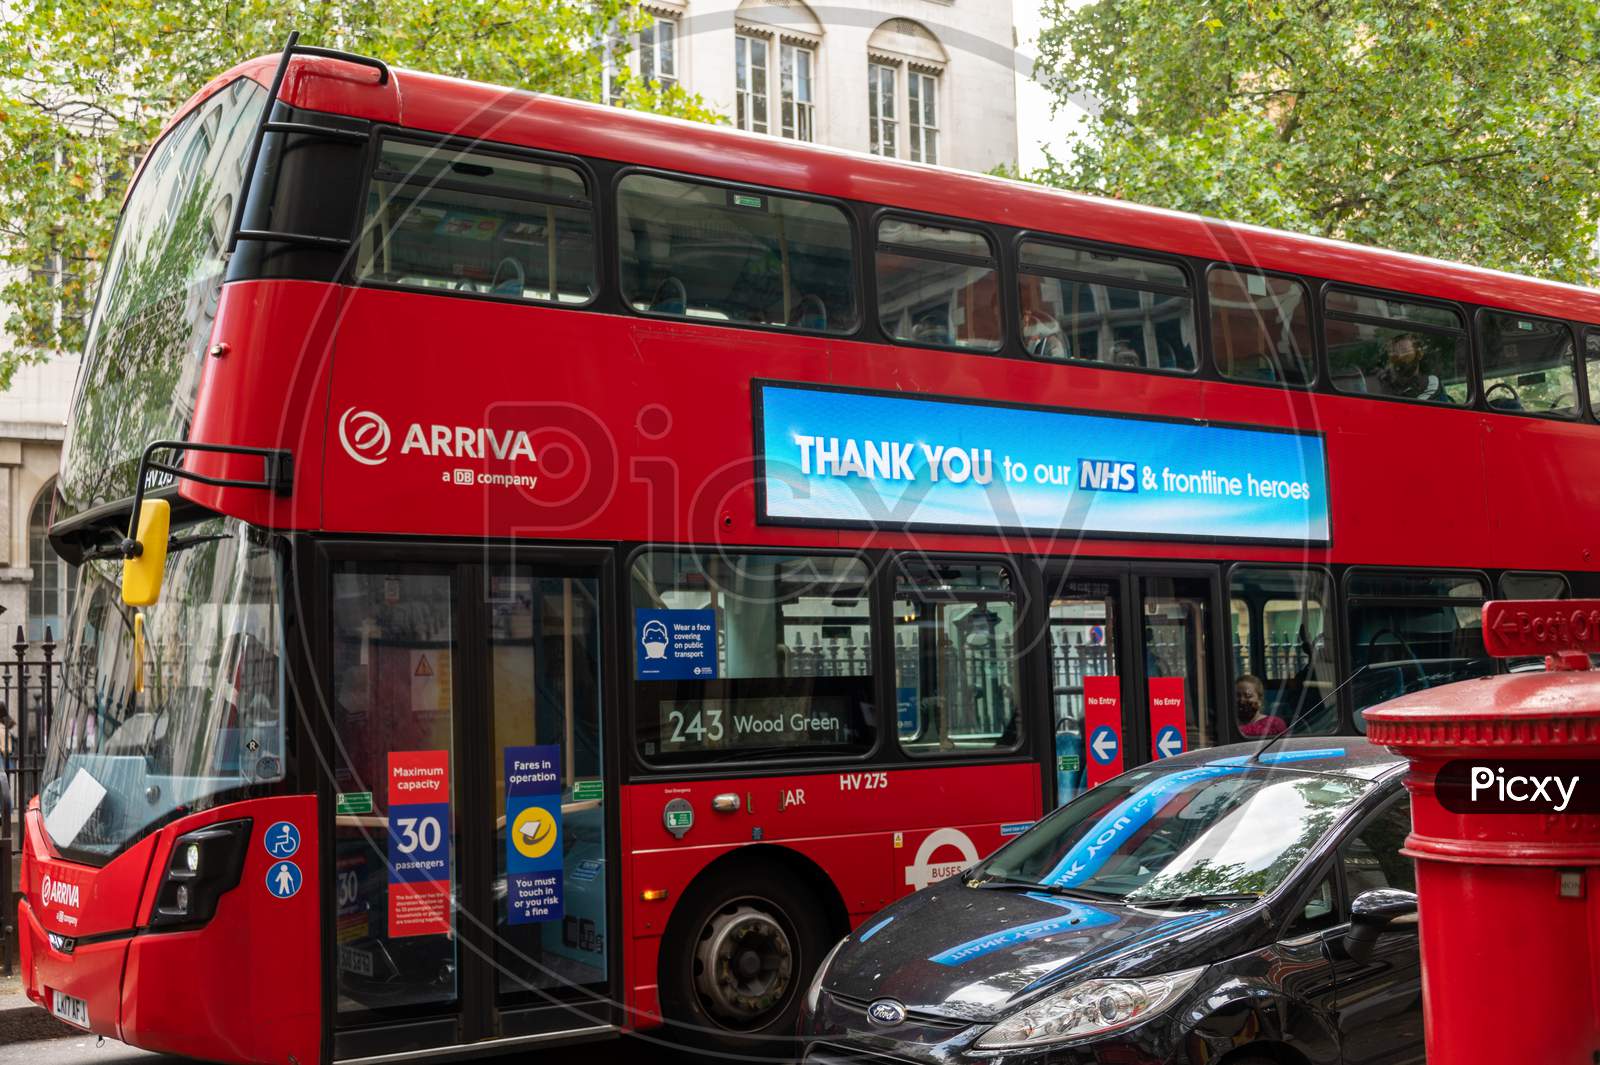 Red London Double Decker Bus With Thank You To Nhs Sign On The Side